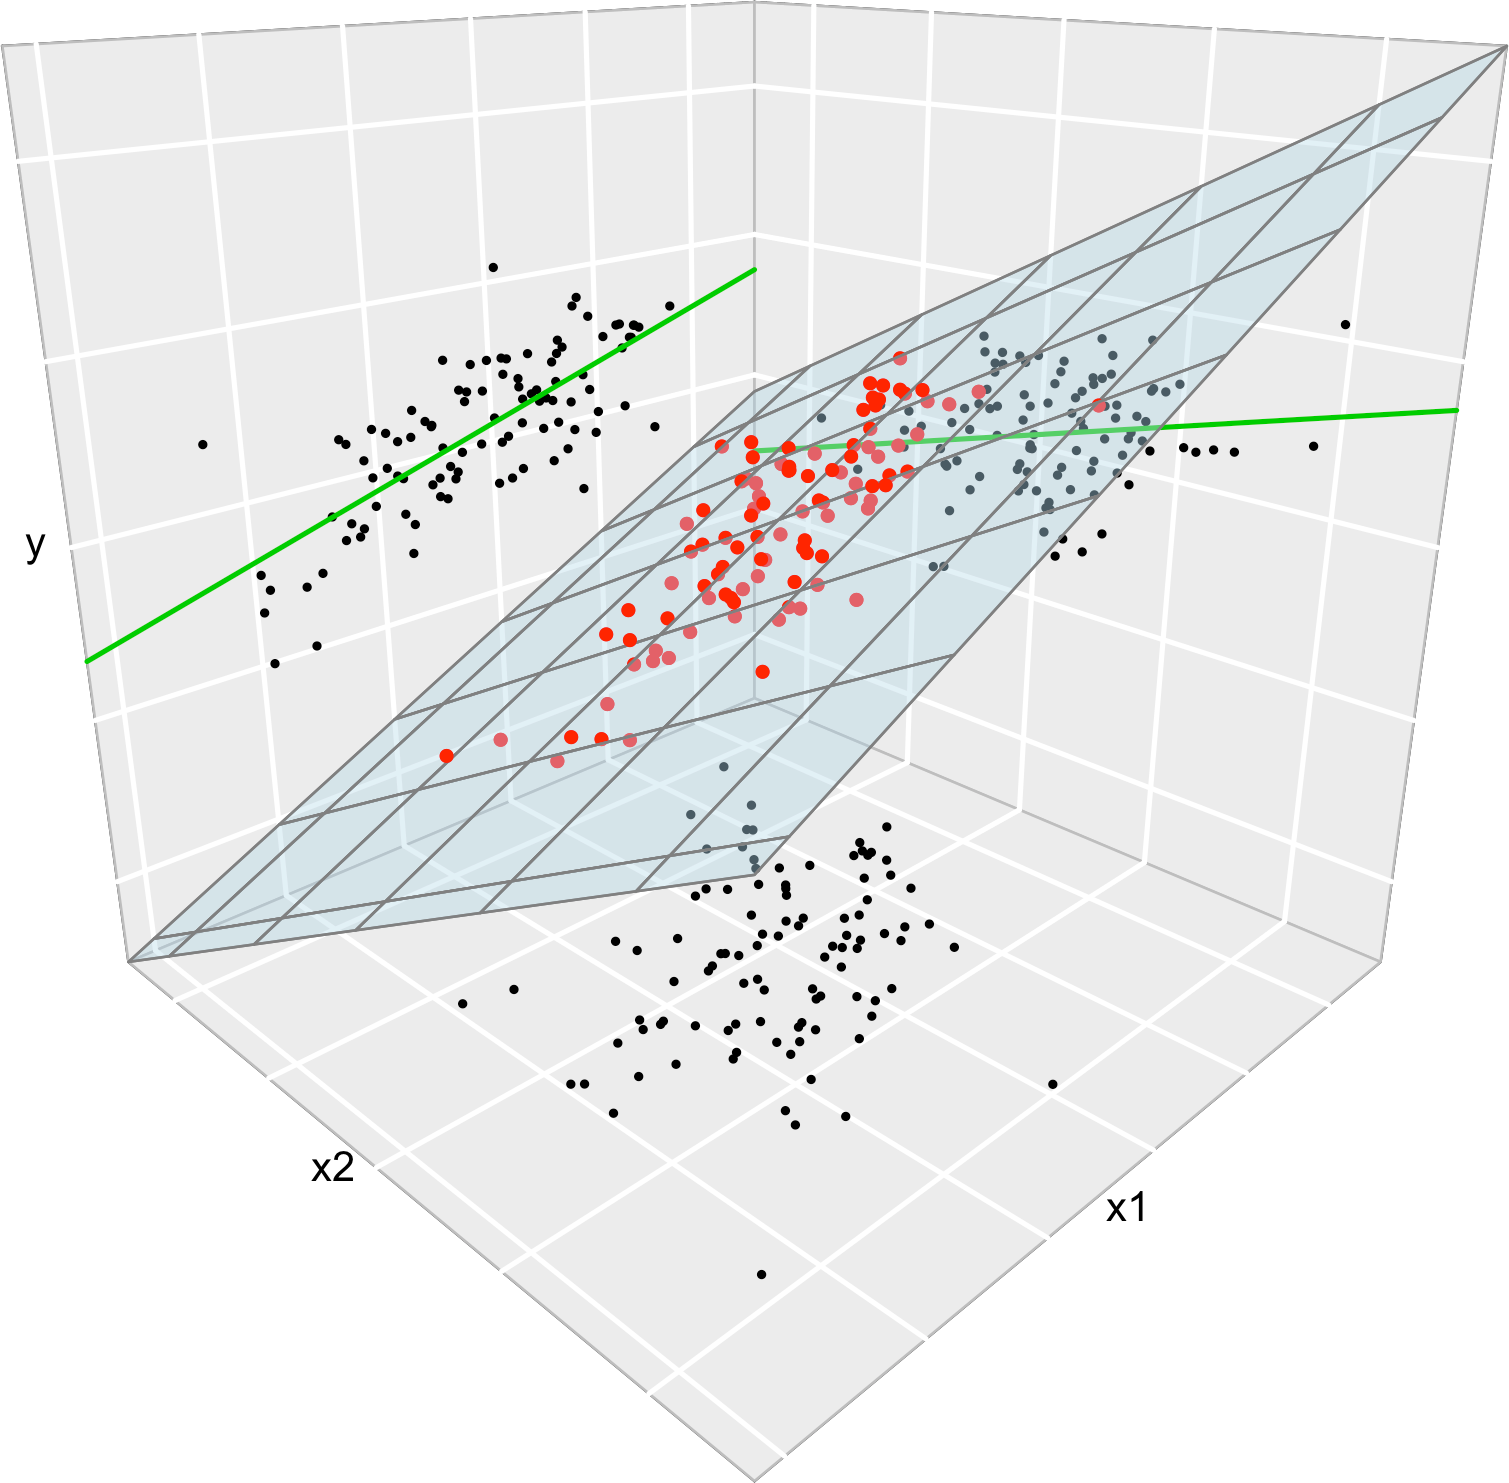 The regression plane (blue) of \(Y\) on \(X_1\) and \(X_2\) and its relation with the simple linear regressions (green lines) of \(Y\) on \(X_1\) and of \(Y\) on \(X_2.\) The red points represent the sample for \((X_1,X_2,Y)\) and the black points the sample projections for \((X_1,X_2)\) (bottom), \((X_1,Y)\) (left), and \((X_2,Y)\) (right). As it can be seen, the regression plane does not extend the simple linear regressions.